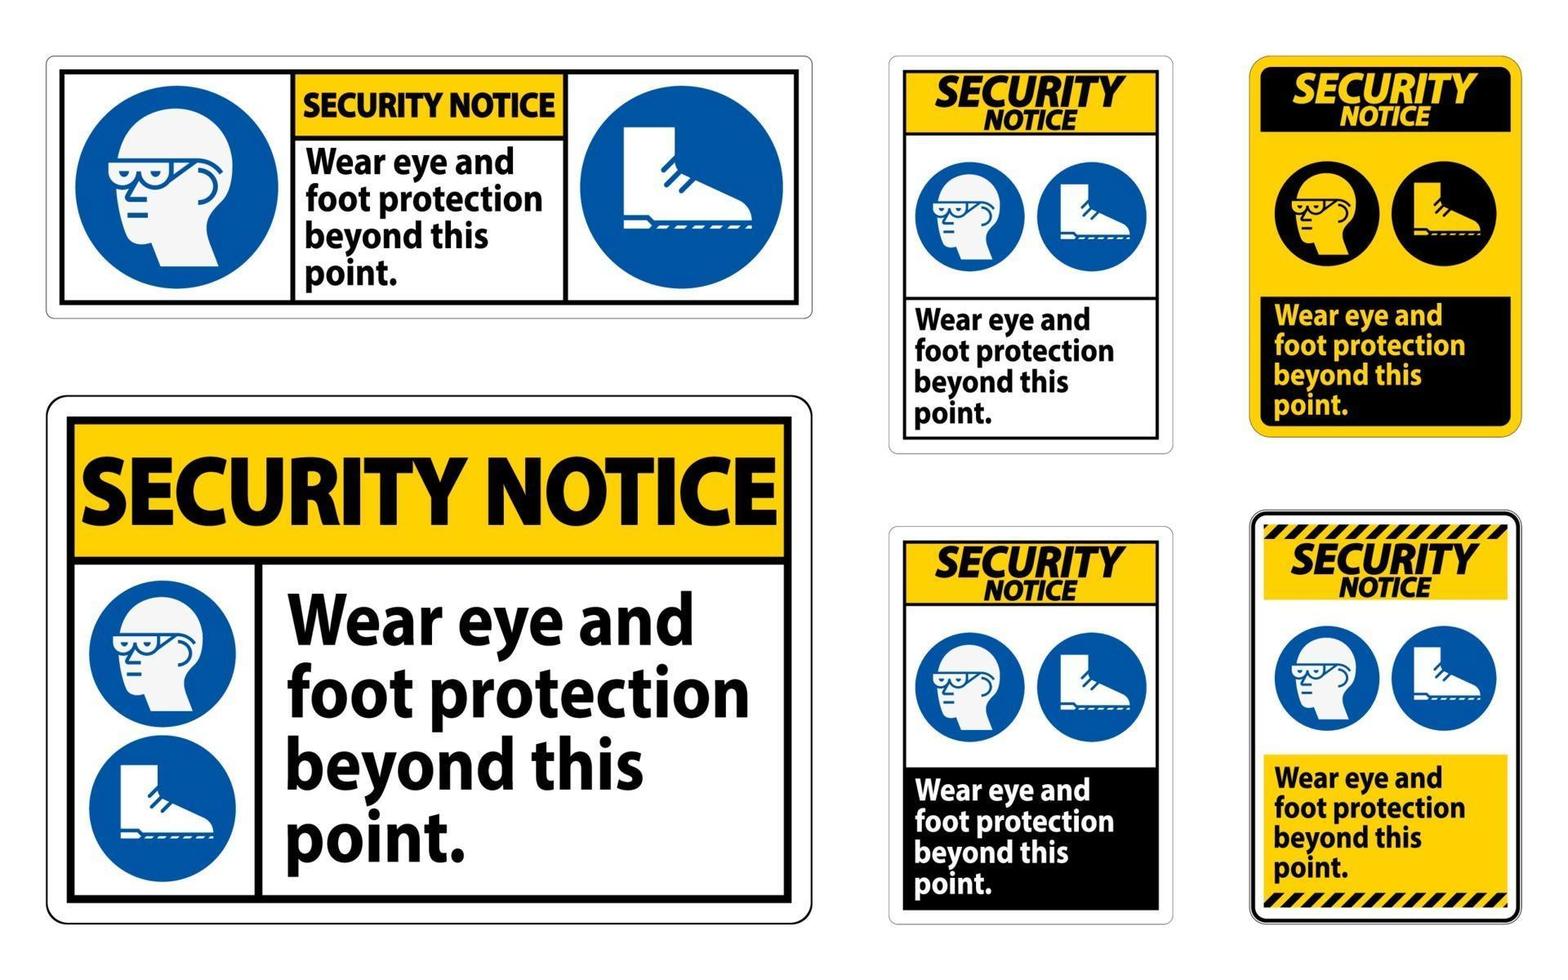 Security Notice Sign Wear Eye And Foot Protection Beyond This Point With PPE Symbols vector